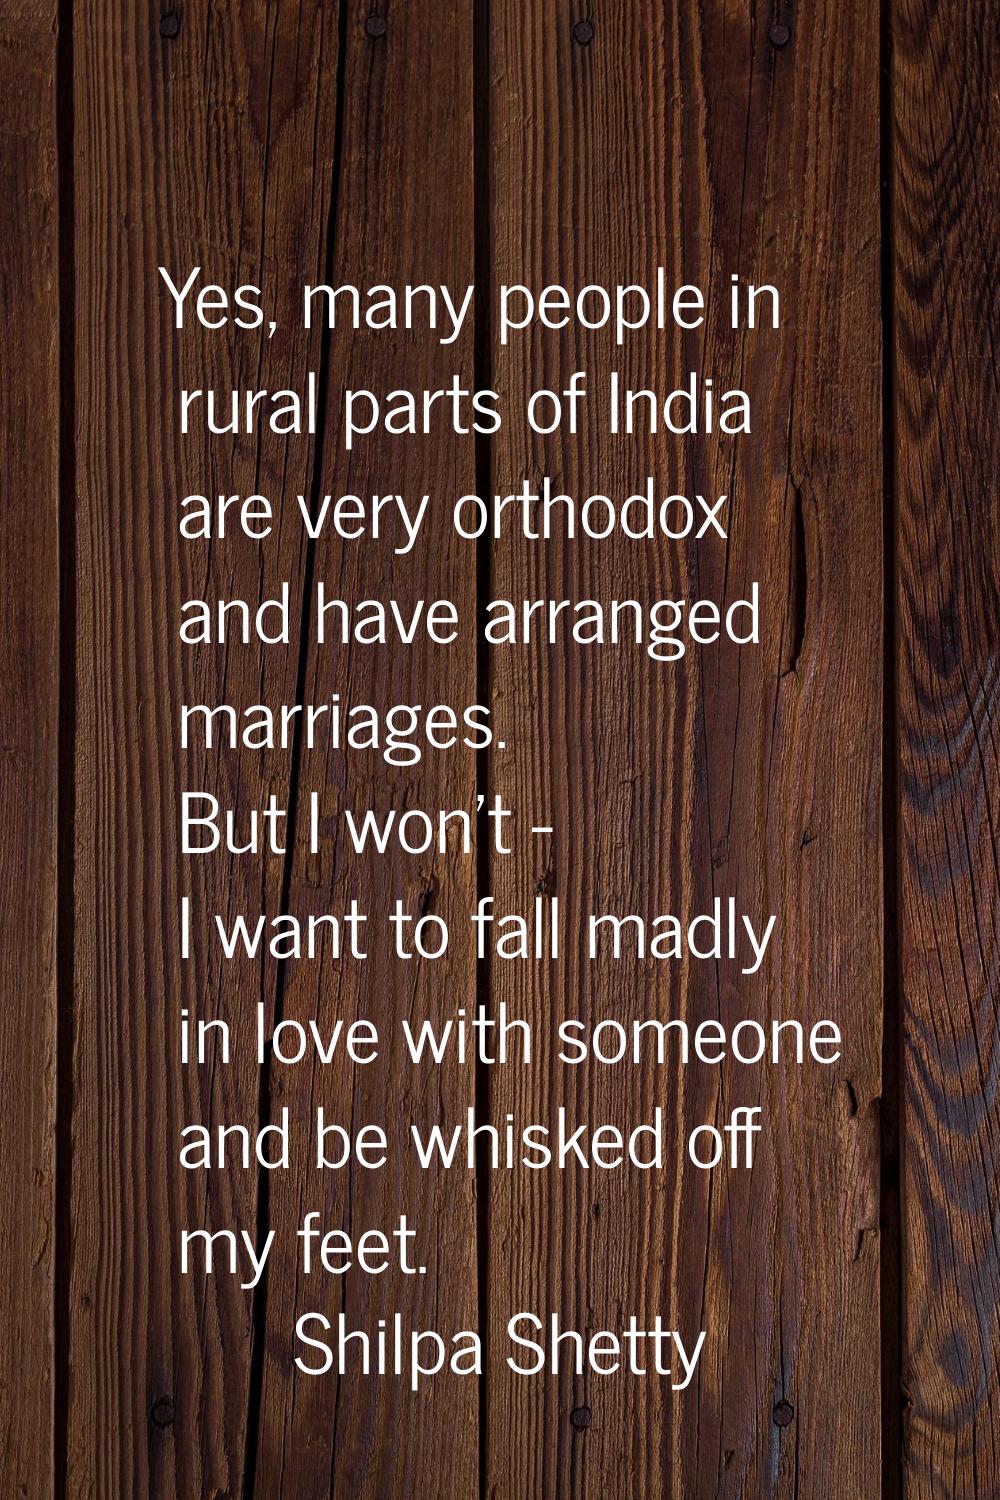 Yes, many people in rural parts of India are very orthodox and have arranged marriages. But I won't